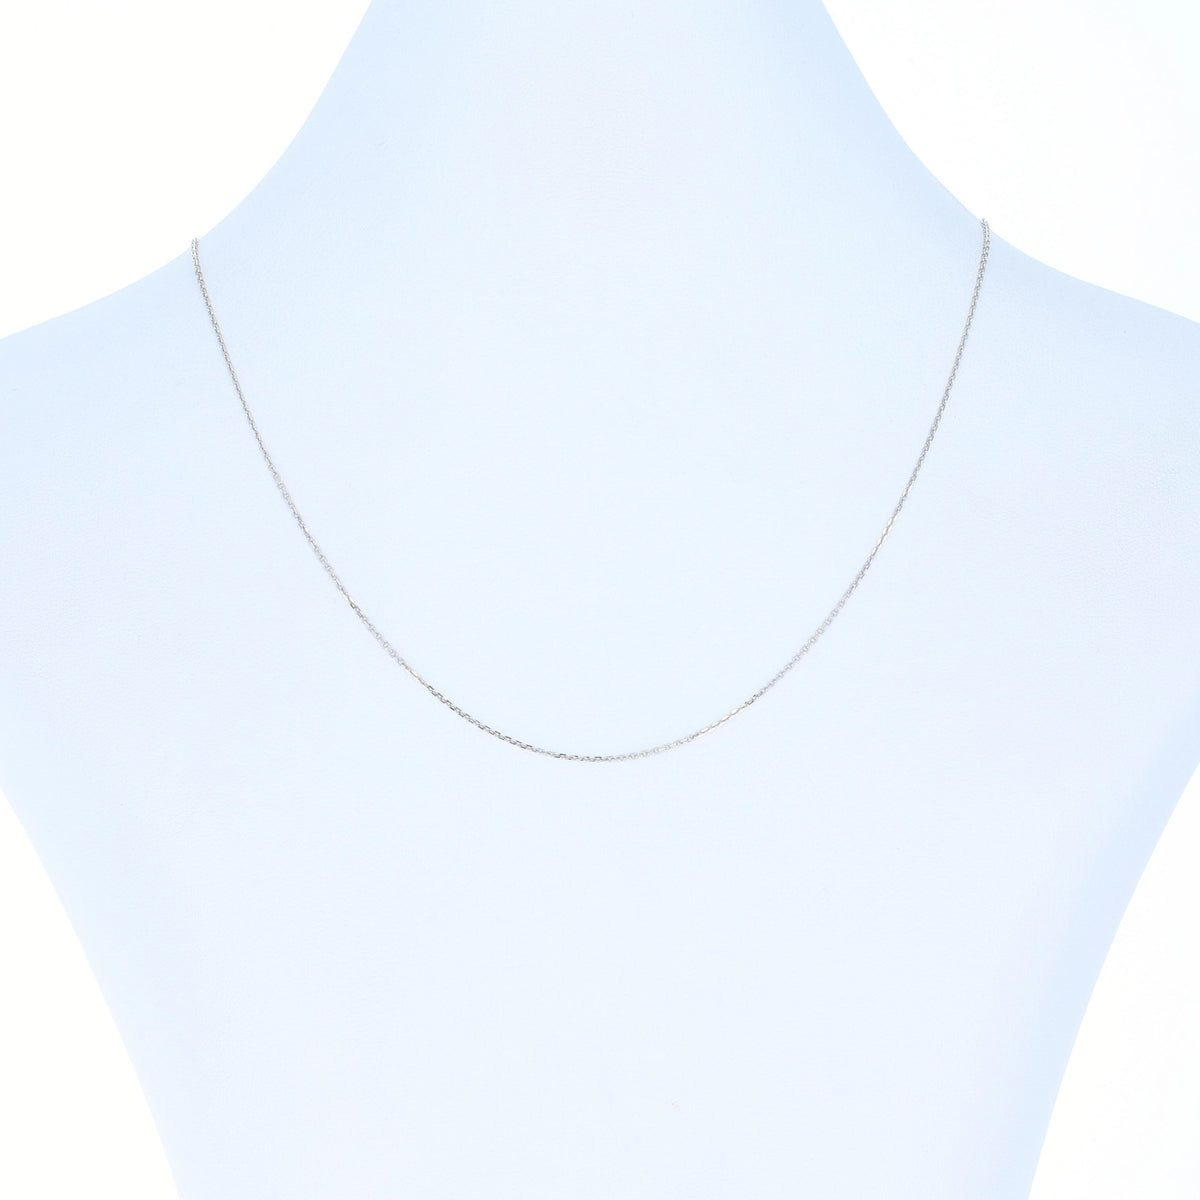 Cable Chain Necklace 16"